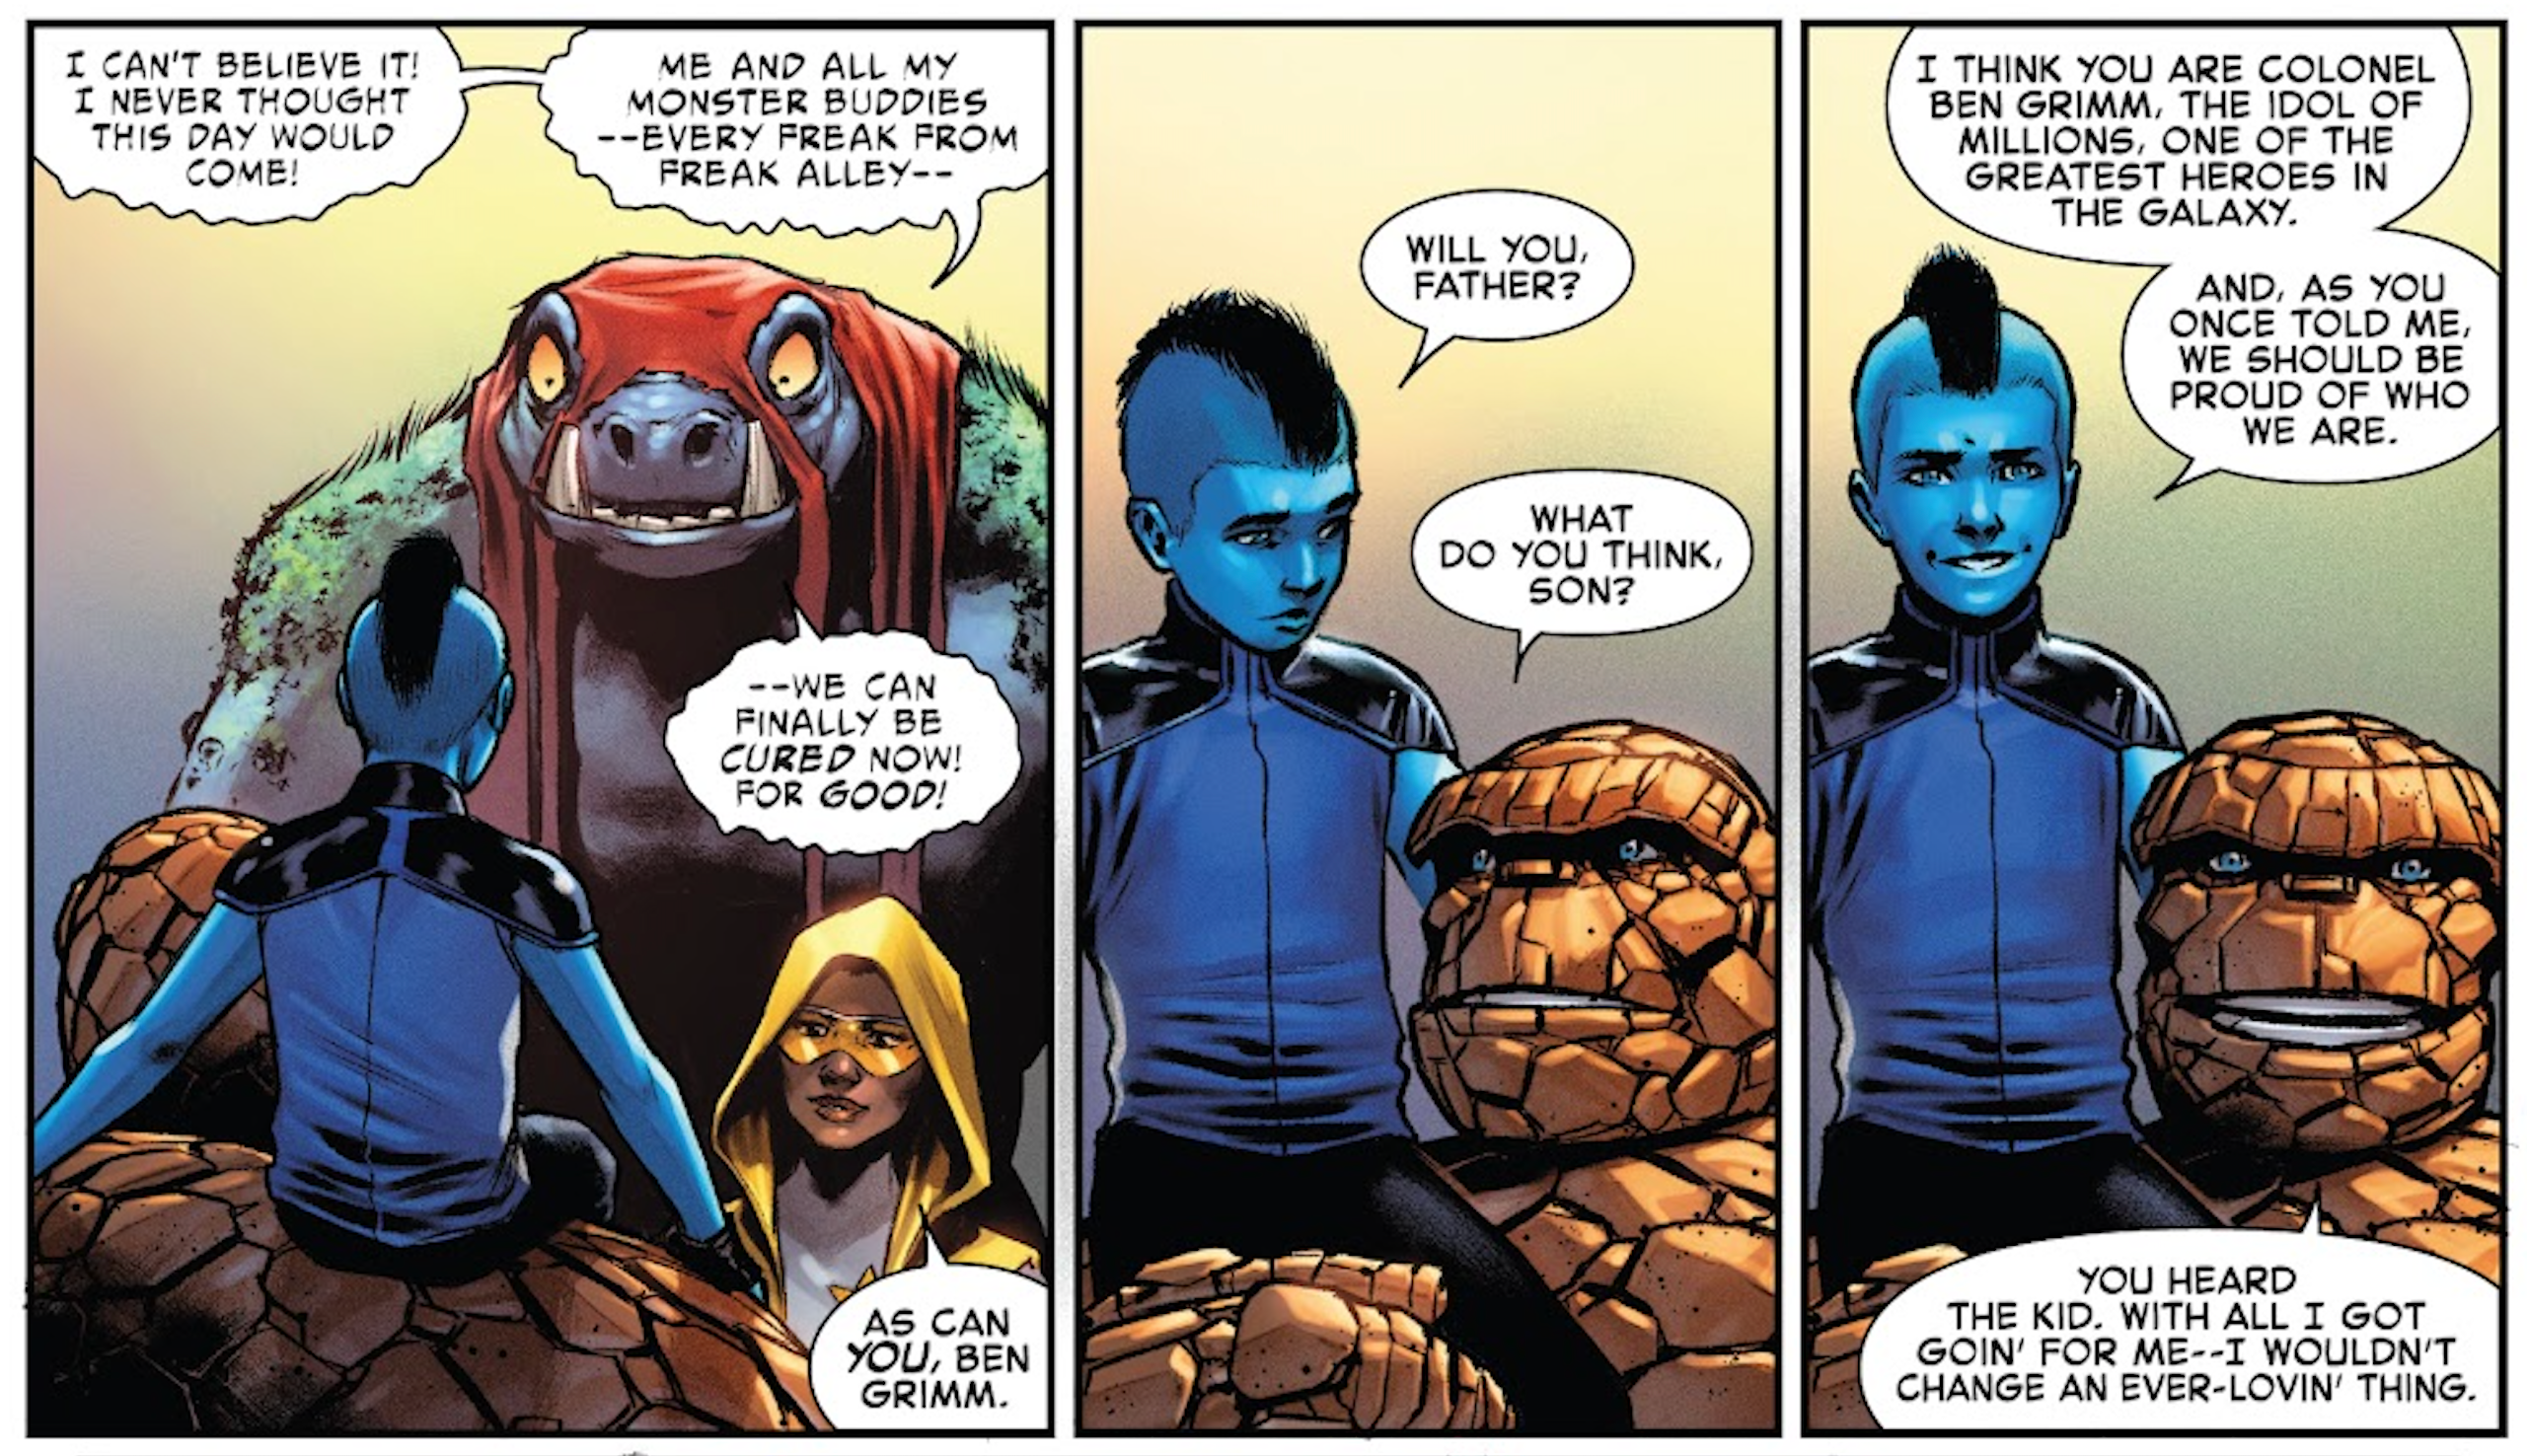 Ben Grimm accepts his fate as the Fantastic Four's Thing